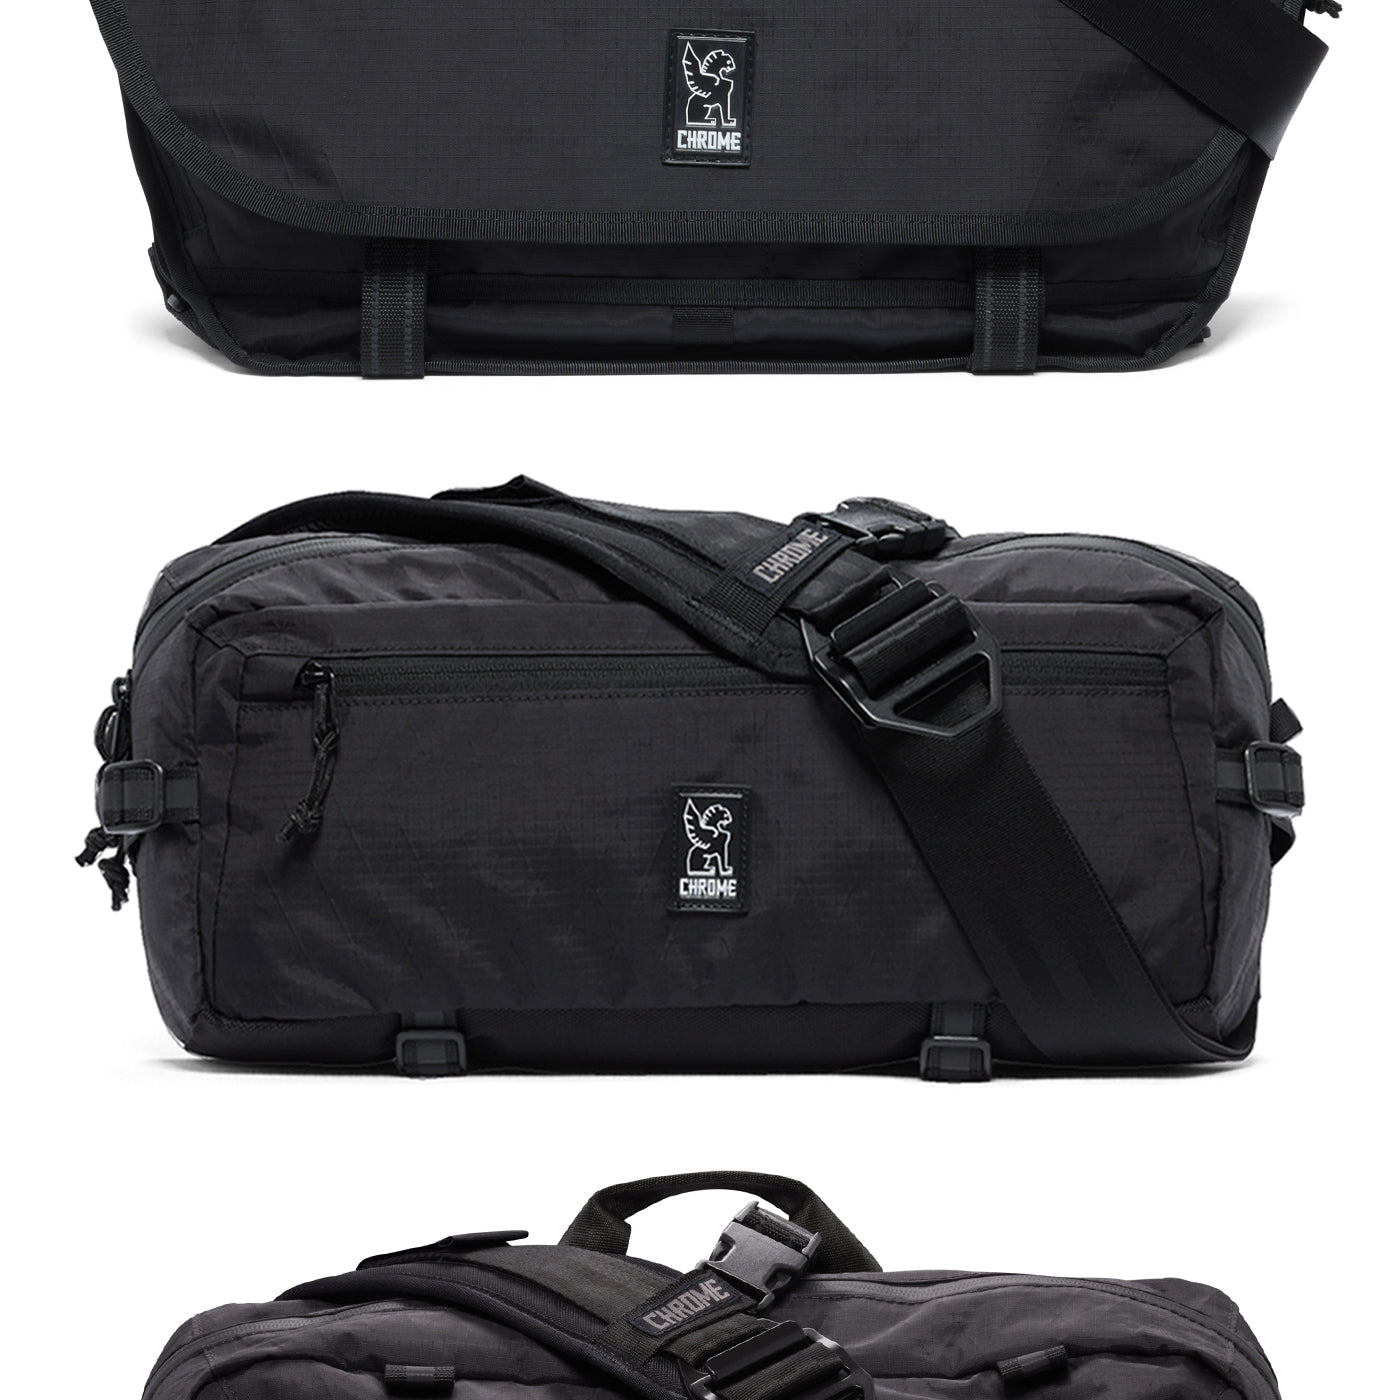 New LTD Black X bags with interchangeable technology step 1 choose a bag